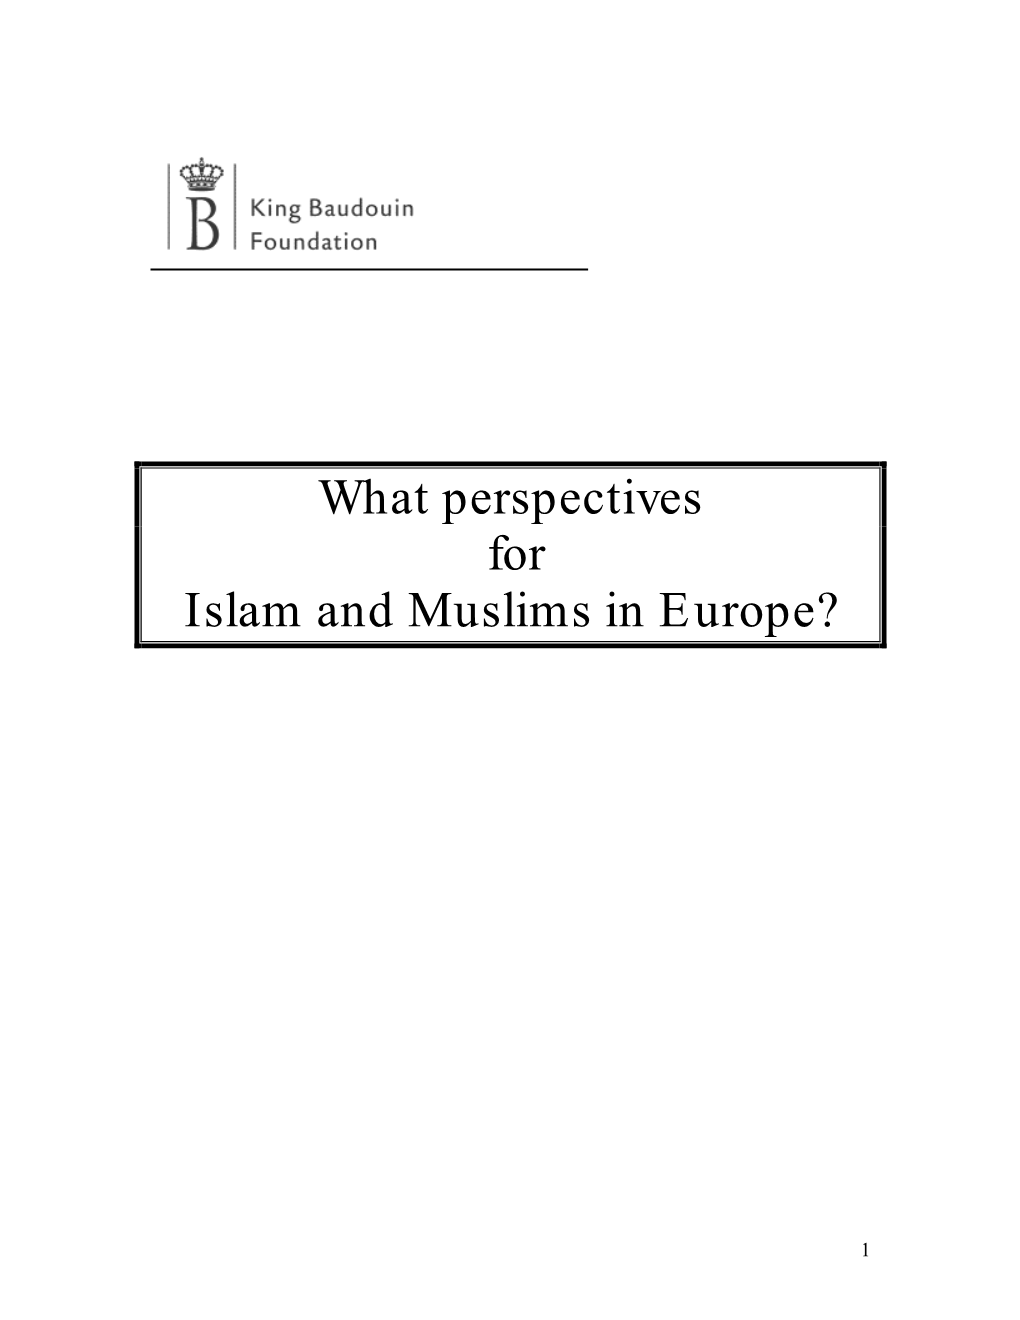 What Perspectives for Islam and Muslims in Europe?